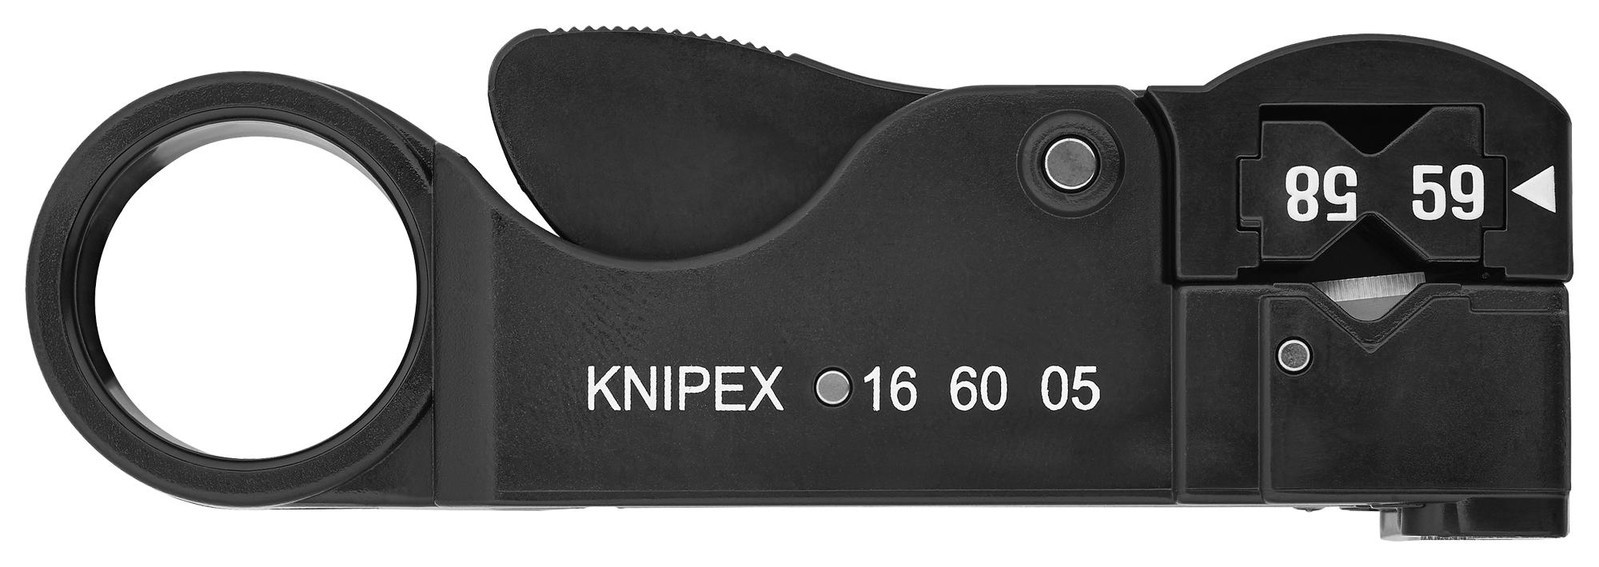 Knipex 16 60 05 Sb Cable Stripper, Coaxial